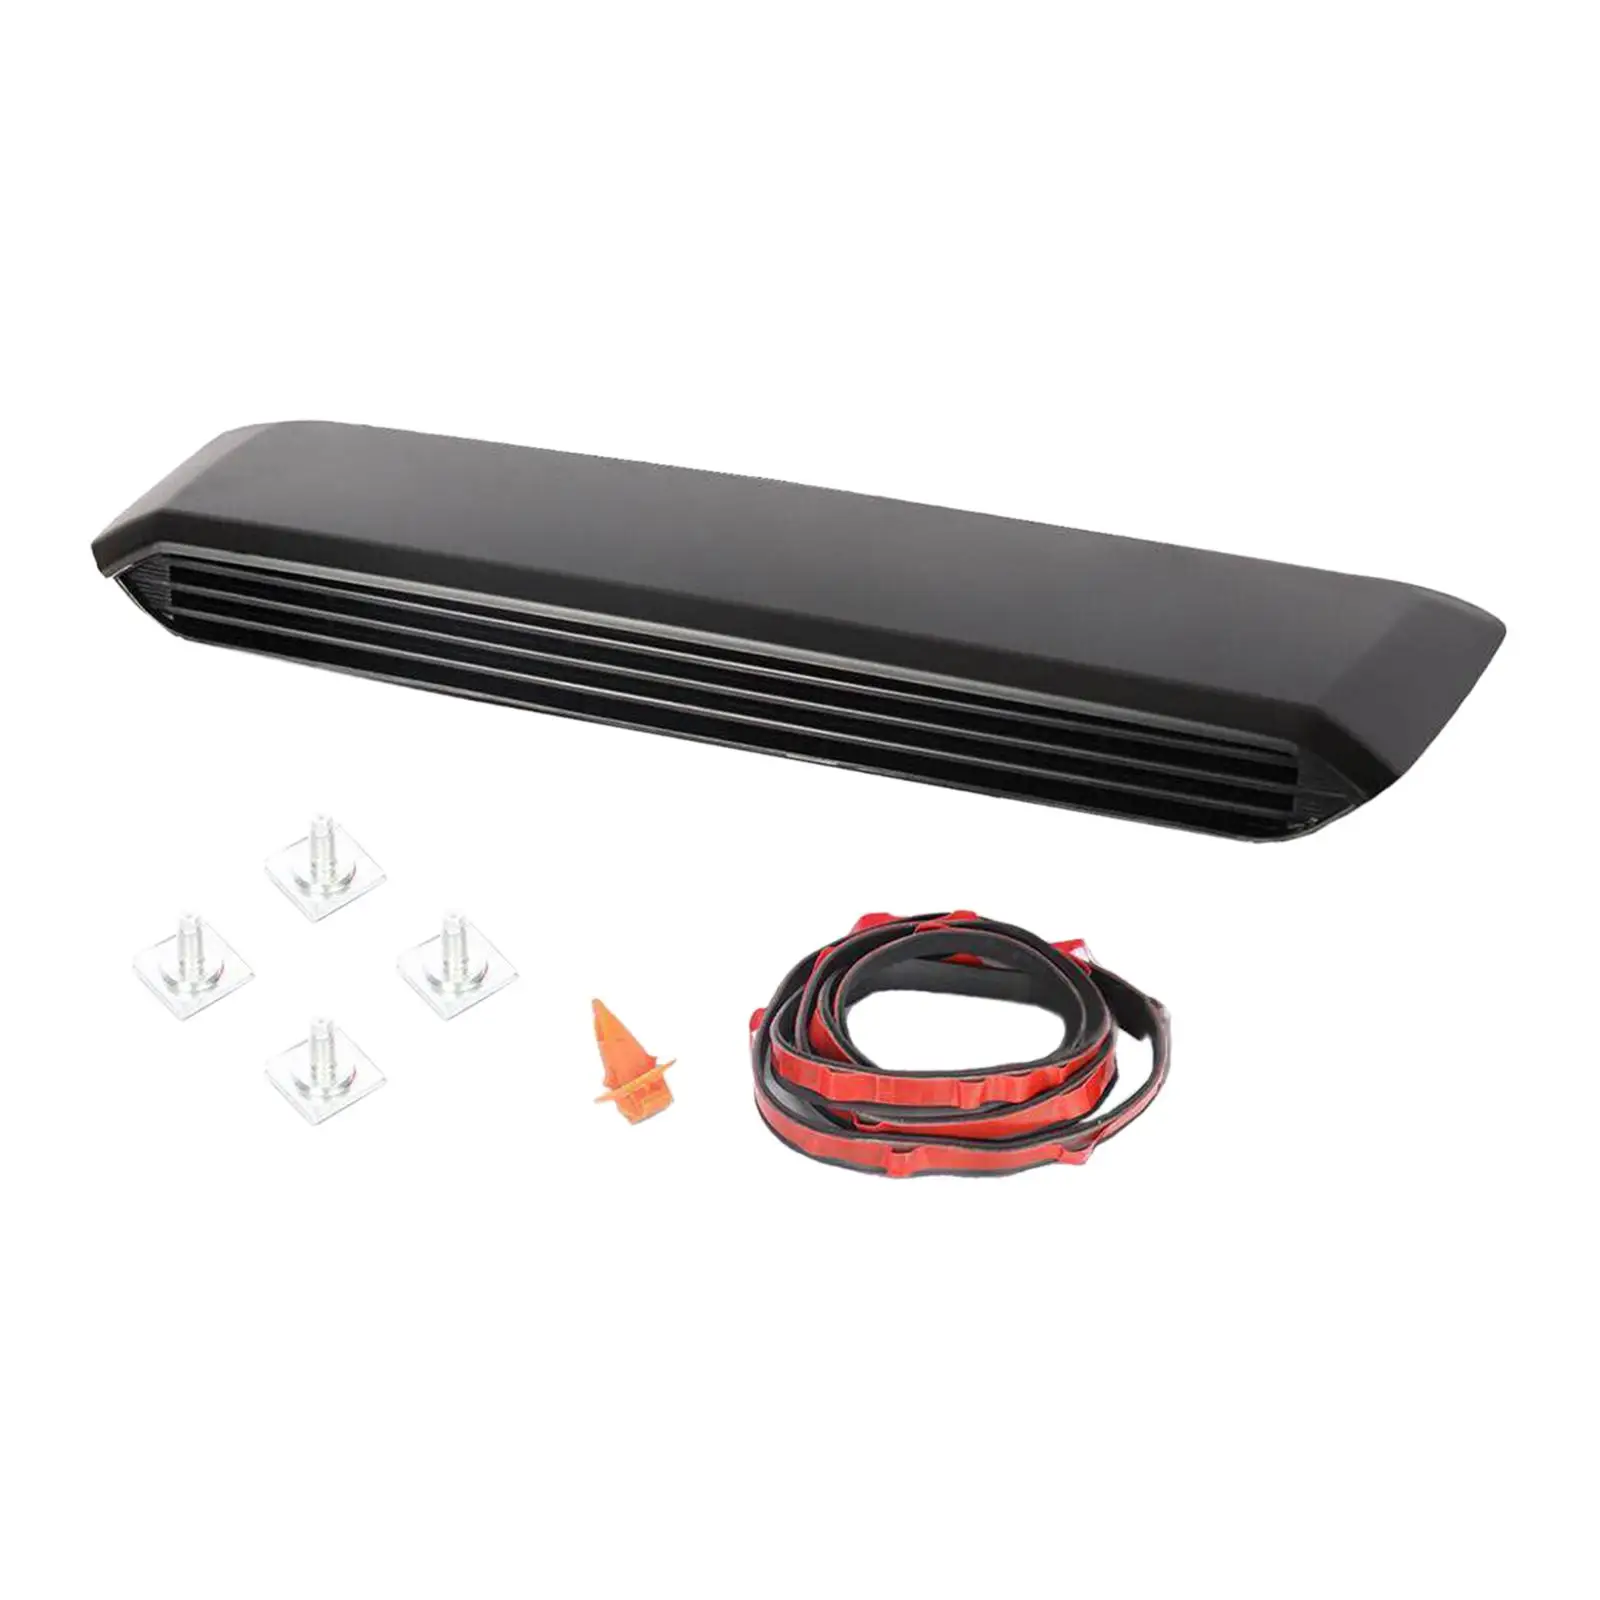 Hood Scoop Kit Premium Durable High Performance Easy to Install 76181-04900 Car